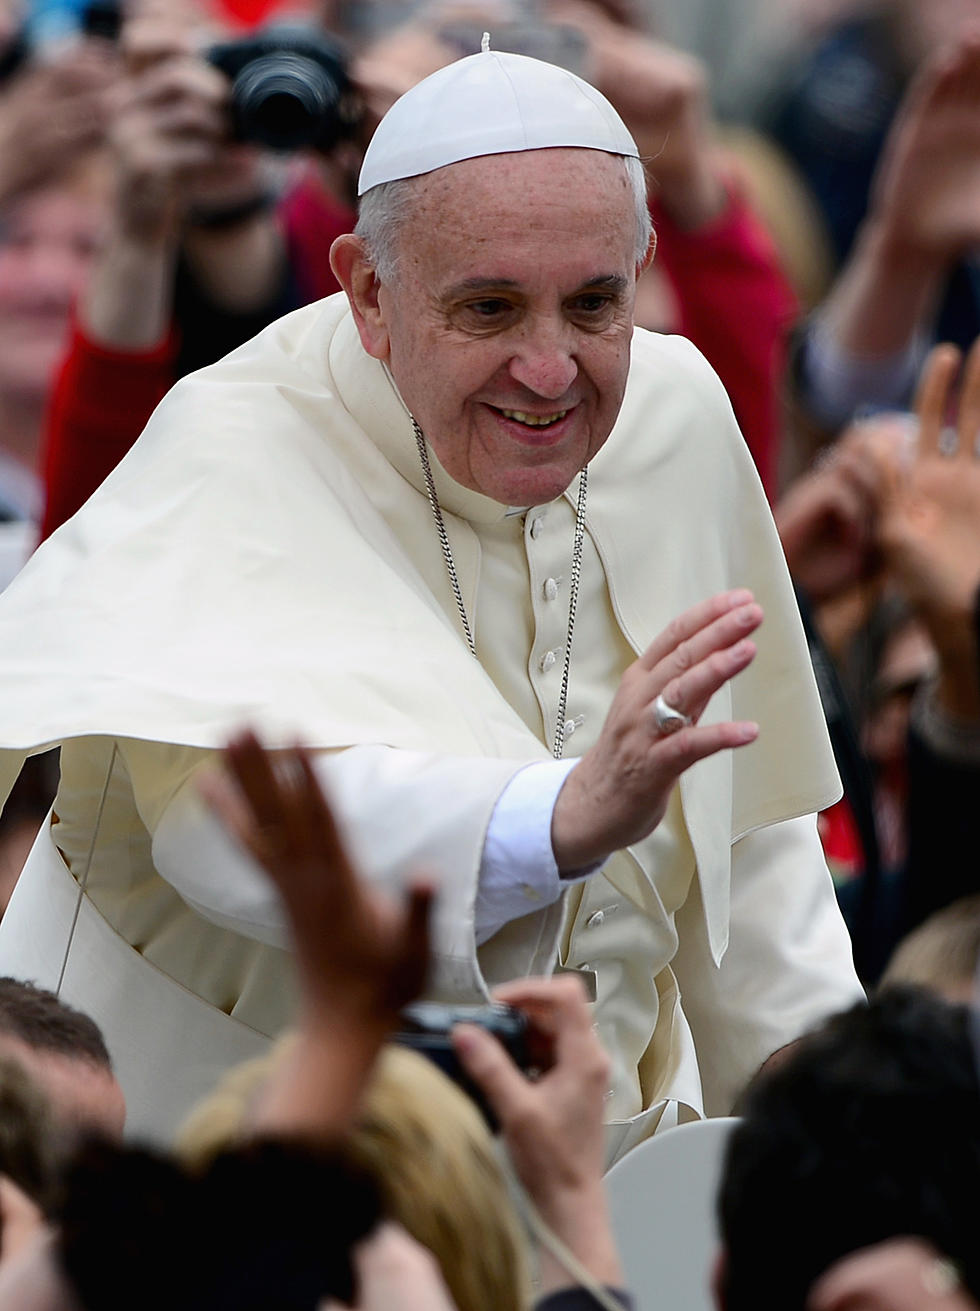 Kevin Miller Hotlist The Pope Wants Your Money Edition